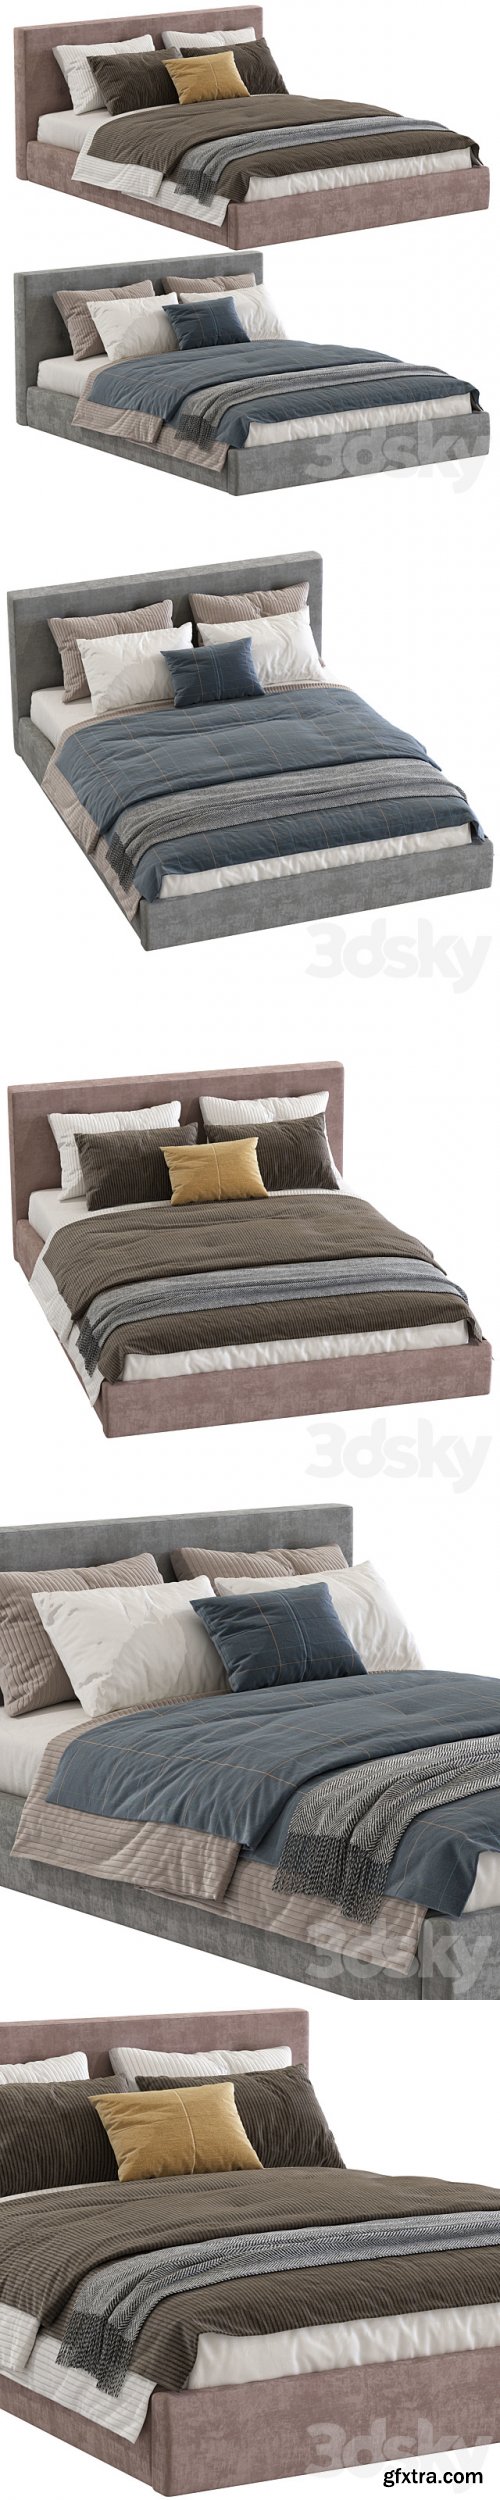 Bed Cushy Upholstered Platfrom Bed